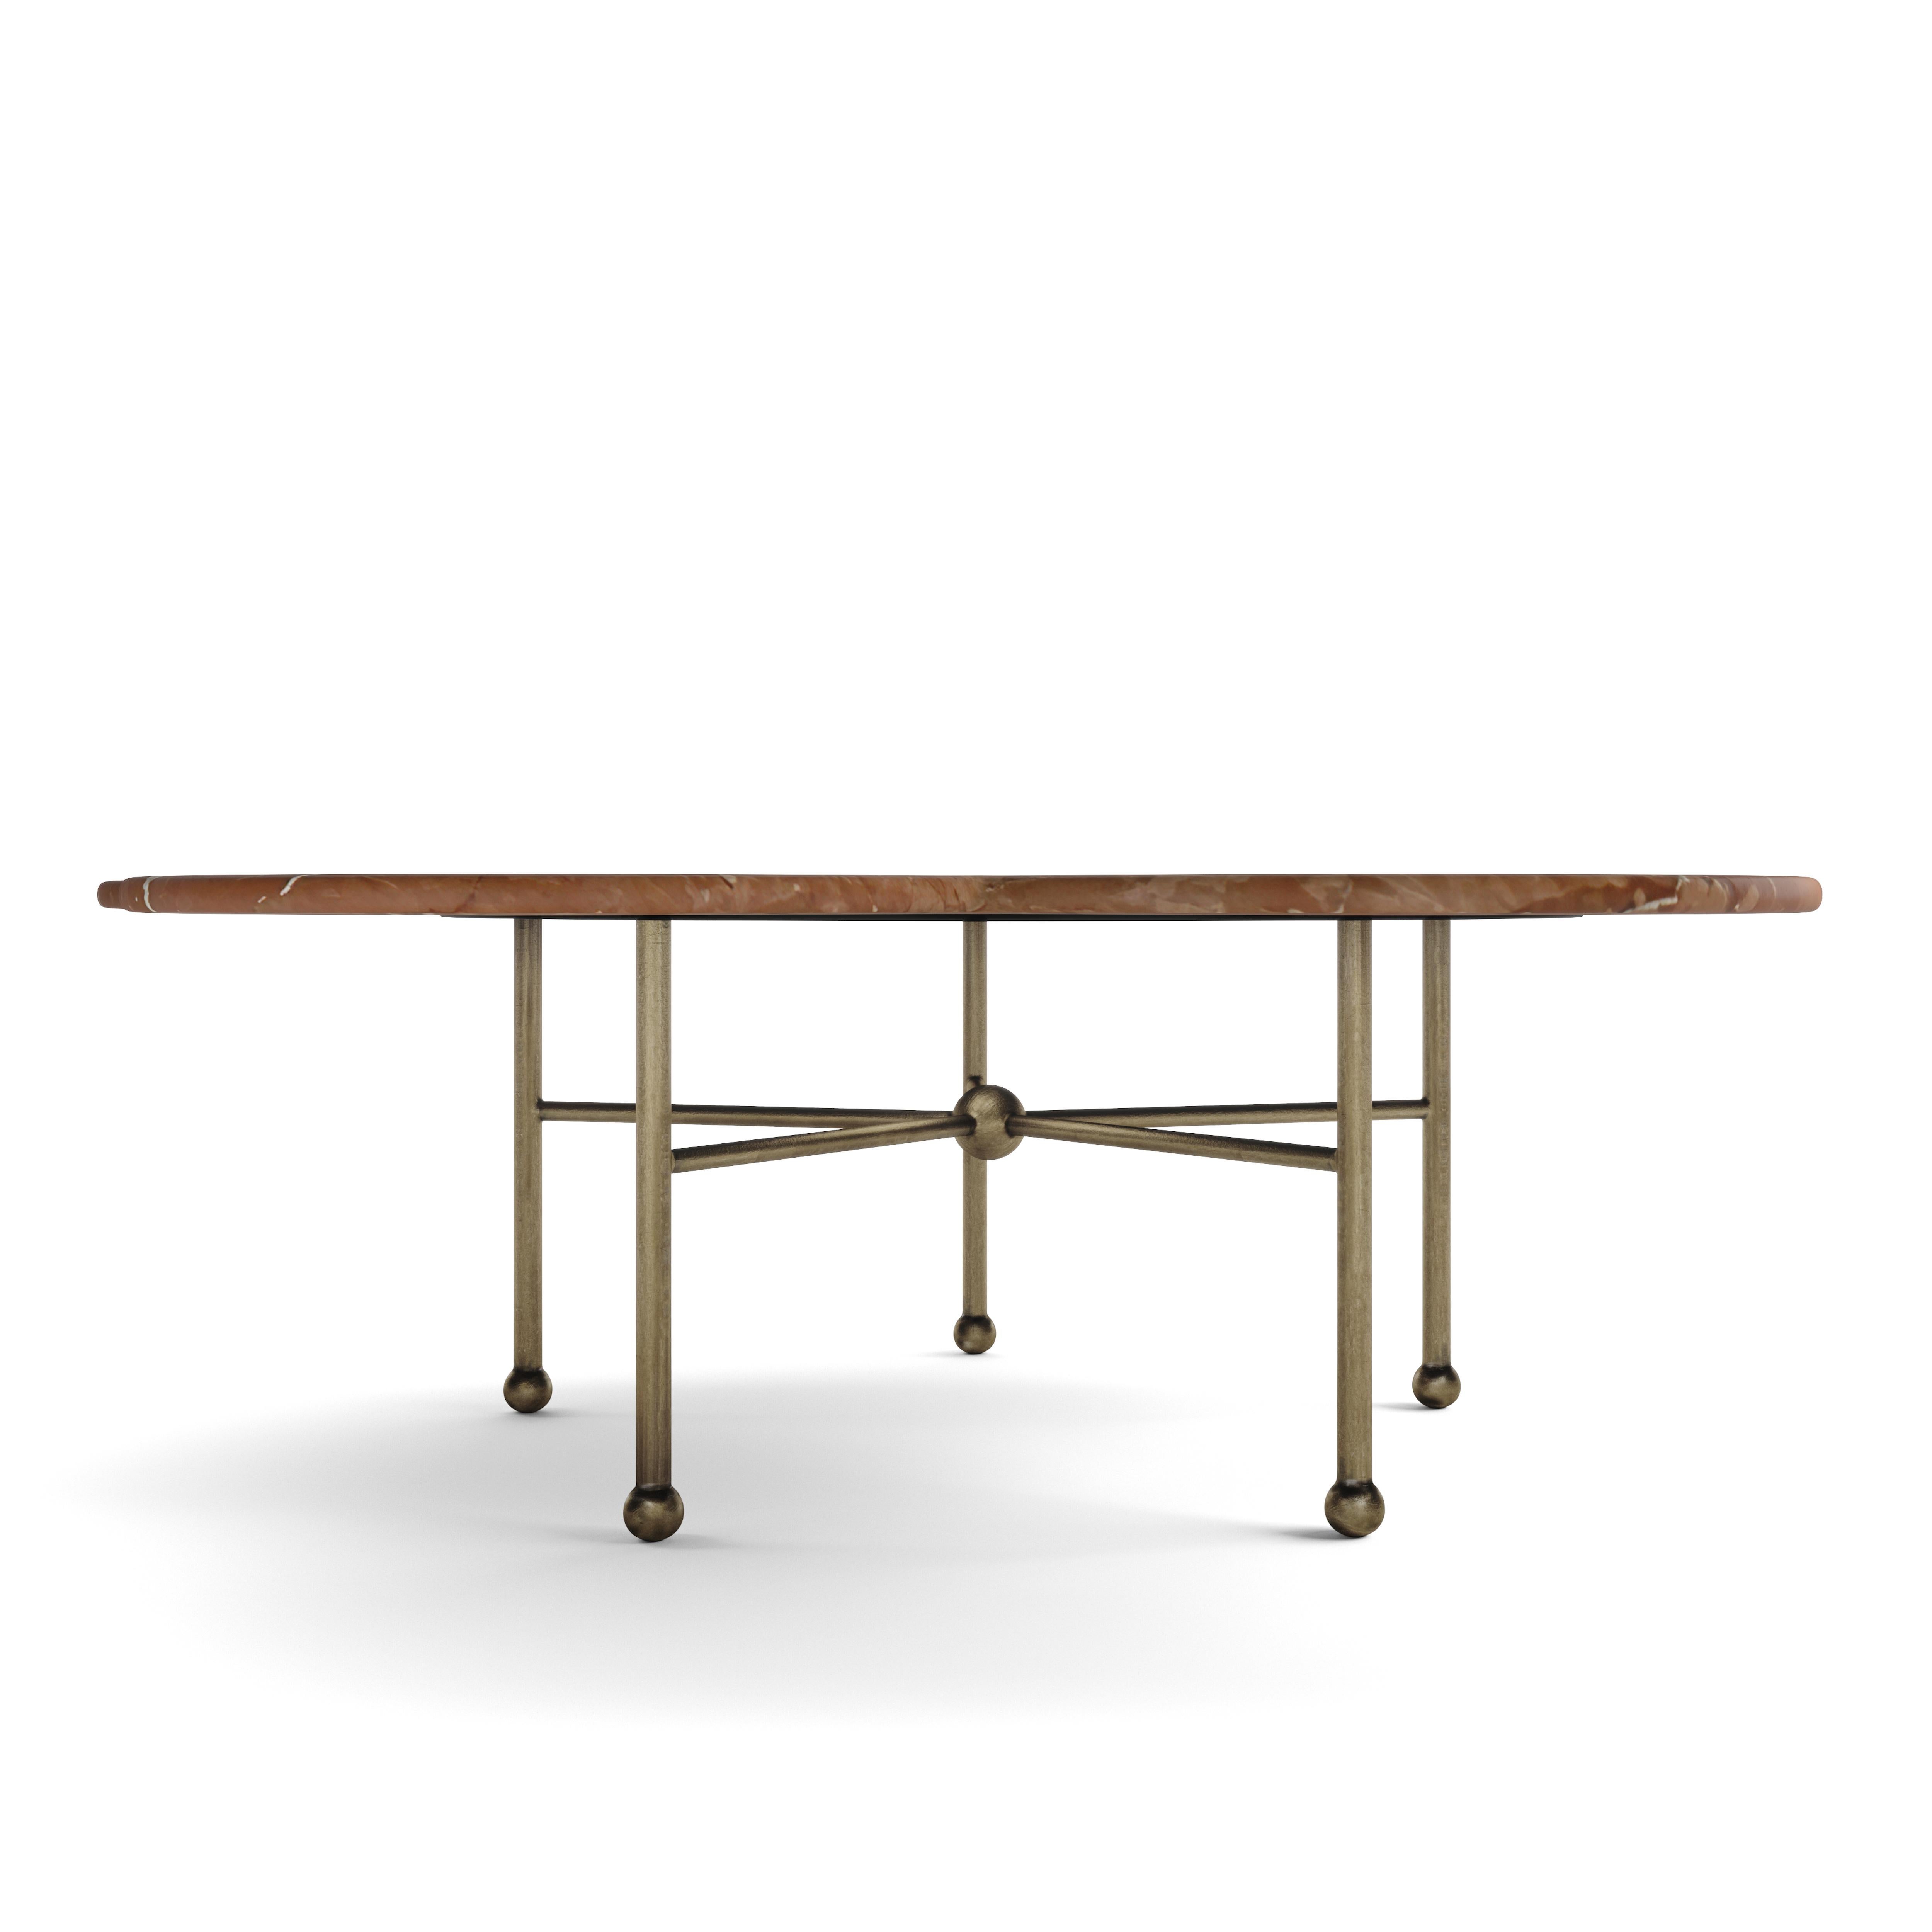 Hand-aged brass pairs with curvilinear rojo marble in our showstopping Archer Table. Statement essentials make everyday life special & our Archer Table is a room-changer. We love this table in a laidback setting, imparting casual elegance with a